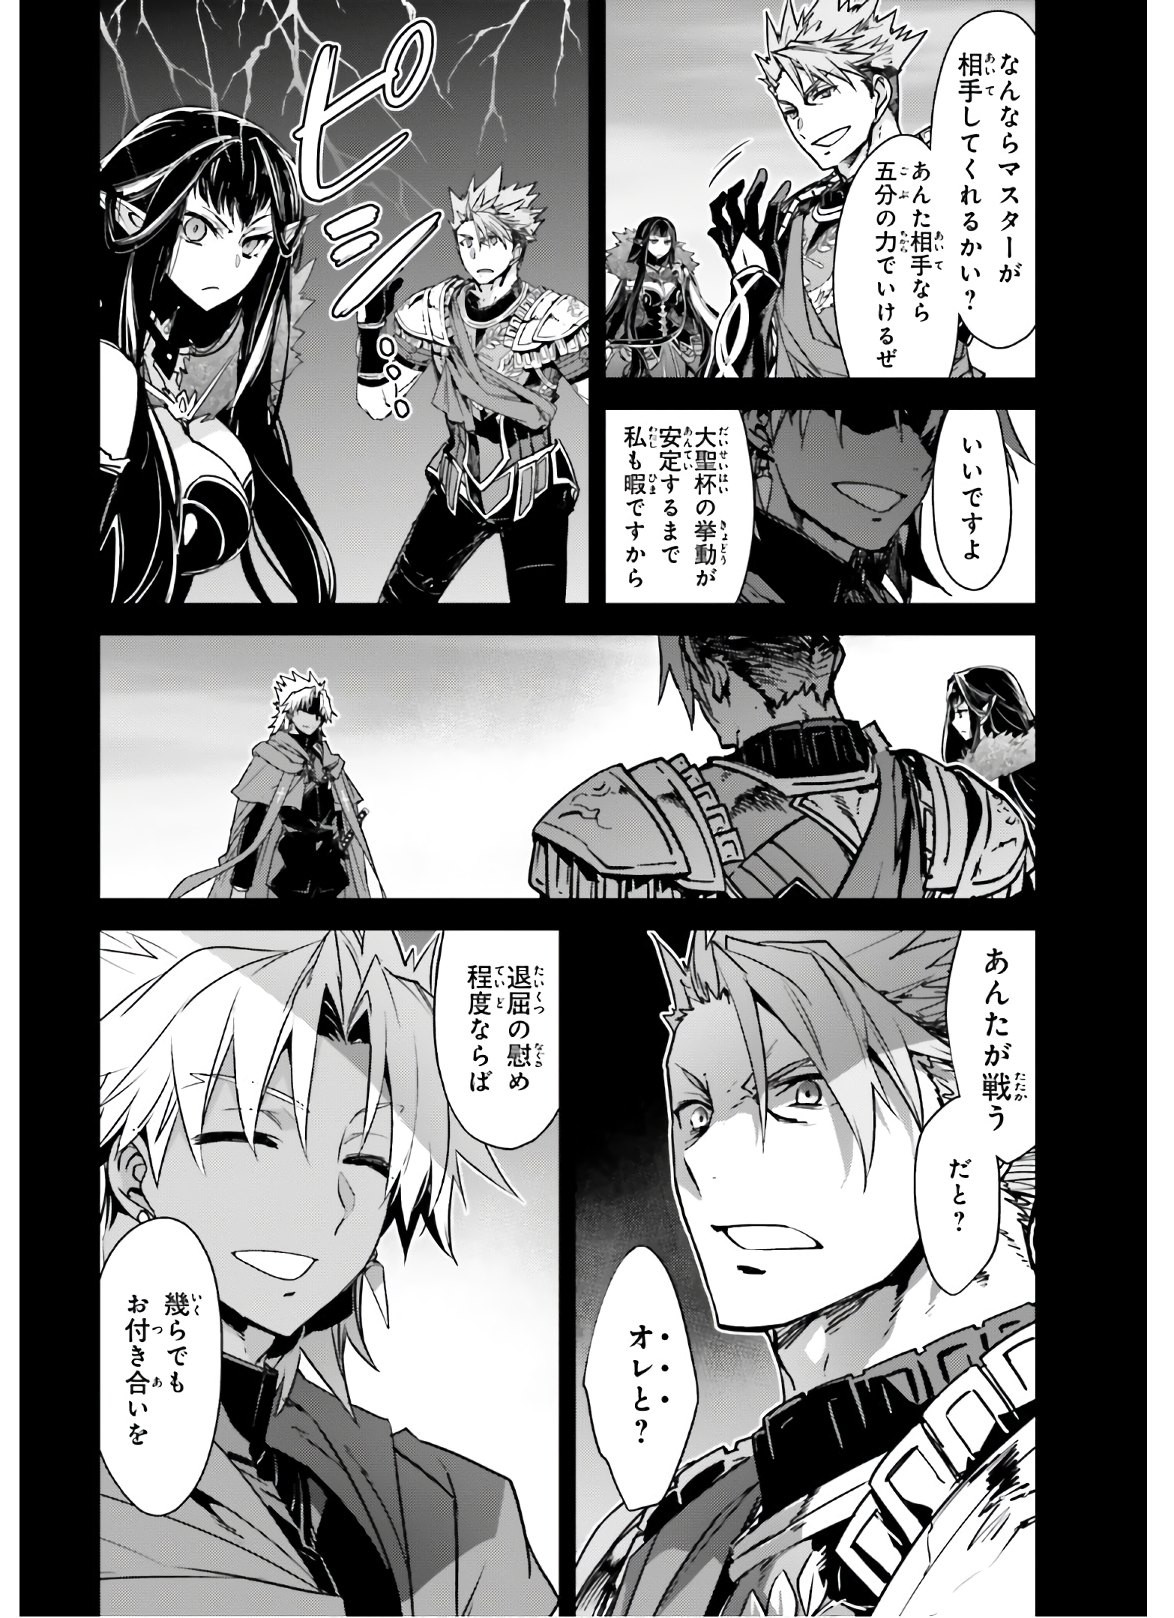 Fate-Apocrypha - Chapter 47 - Page 4